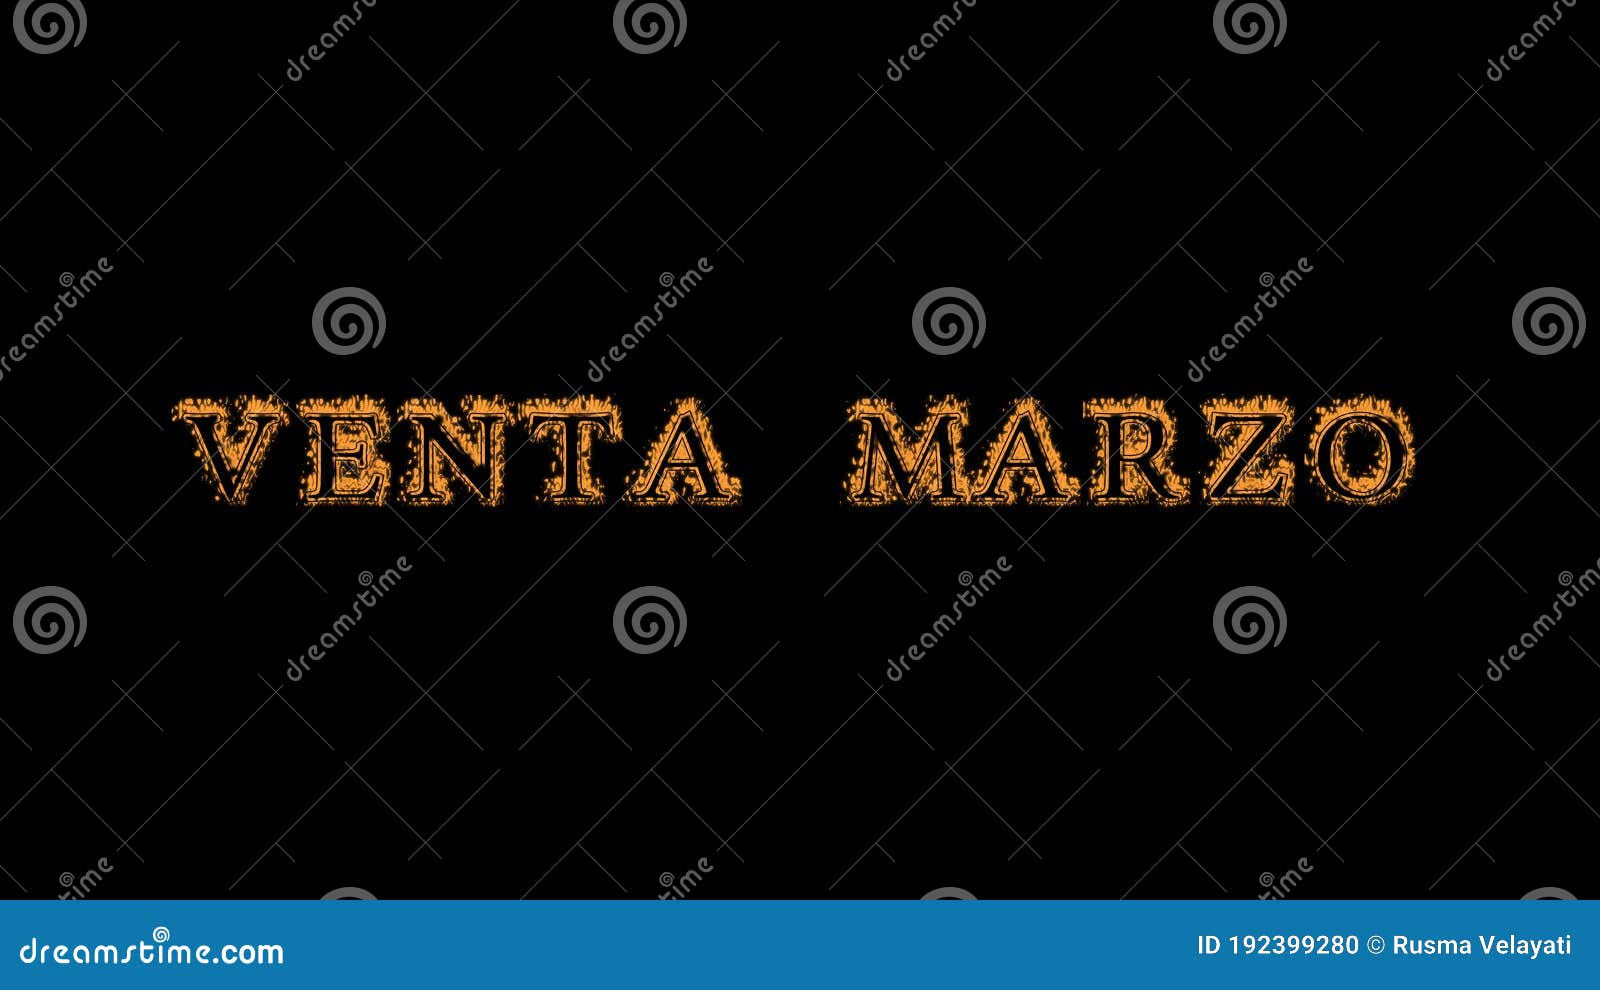 venta marzo fire text effect black background